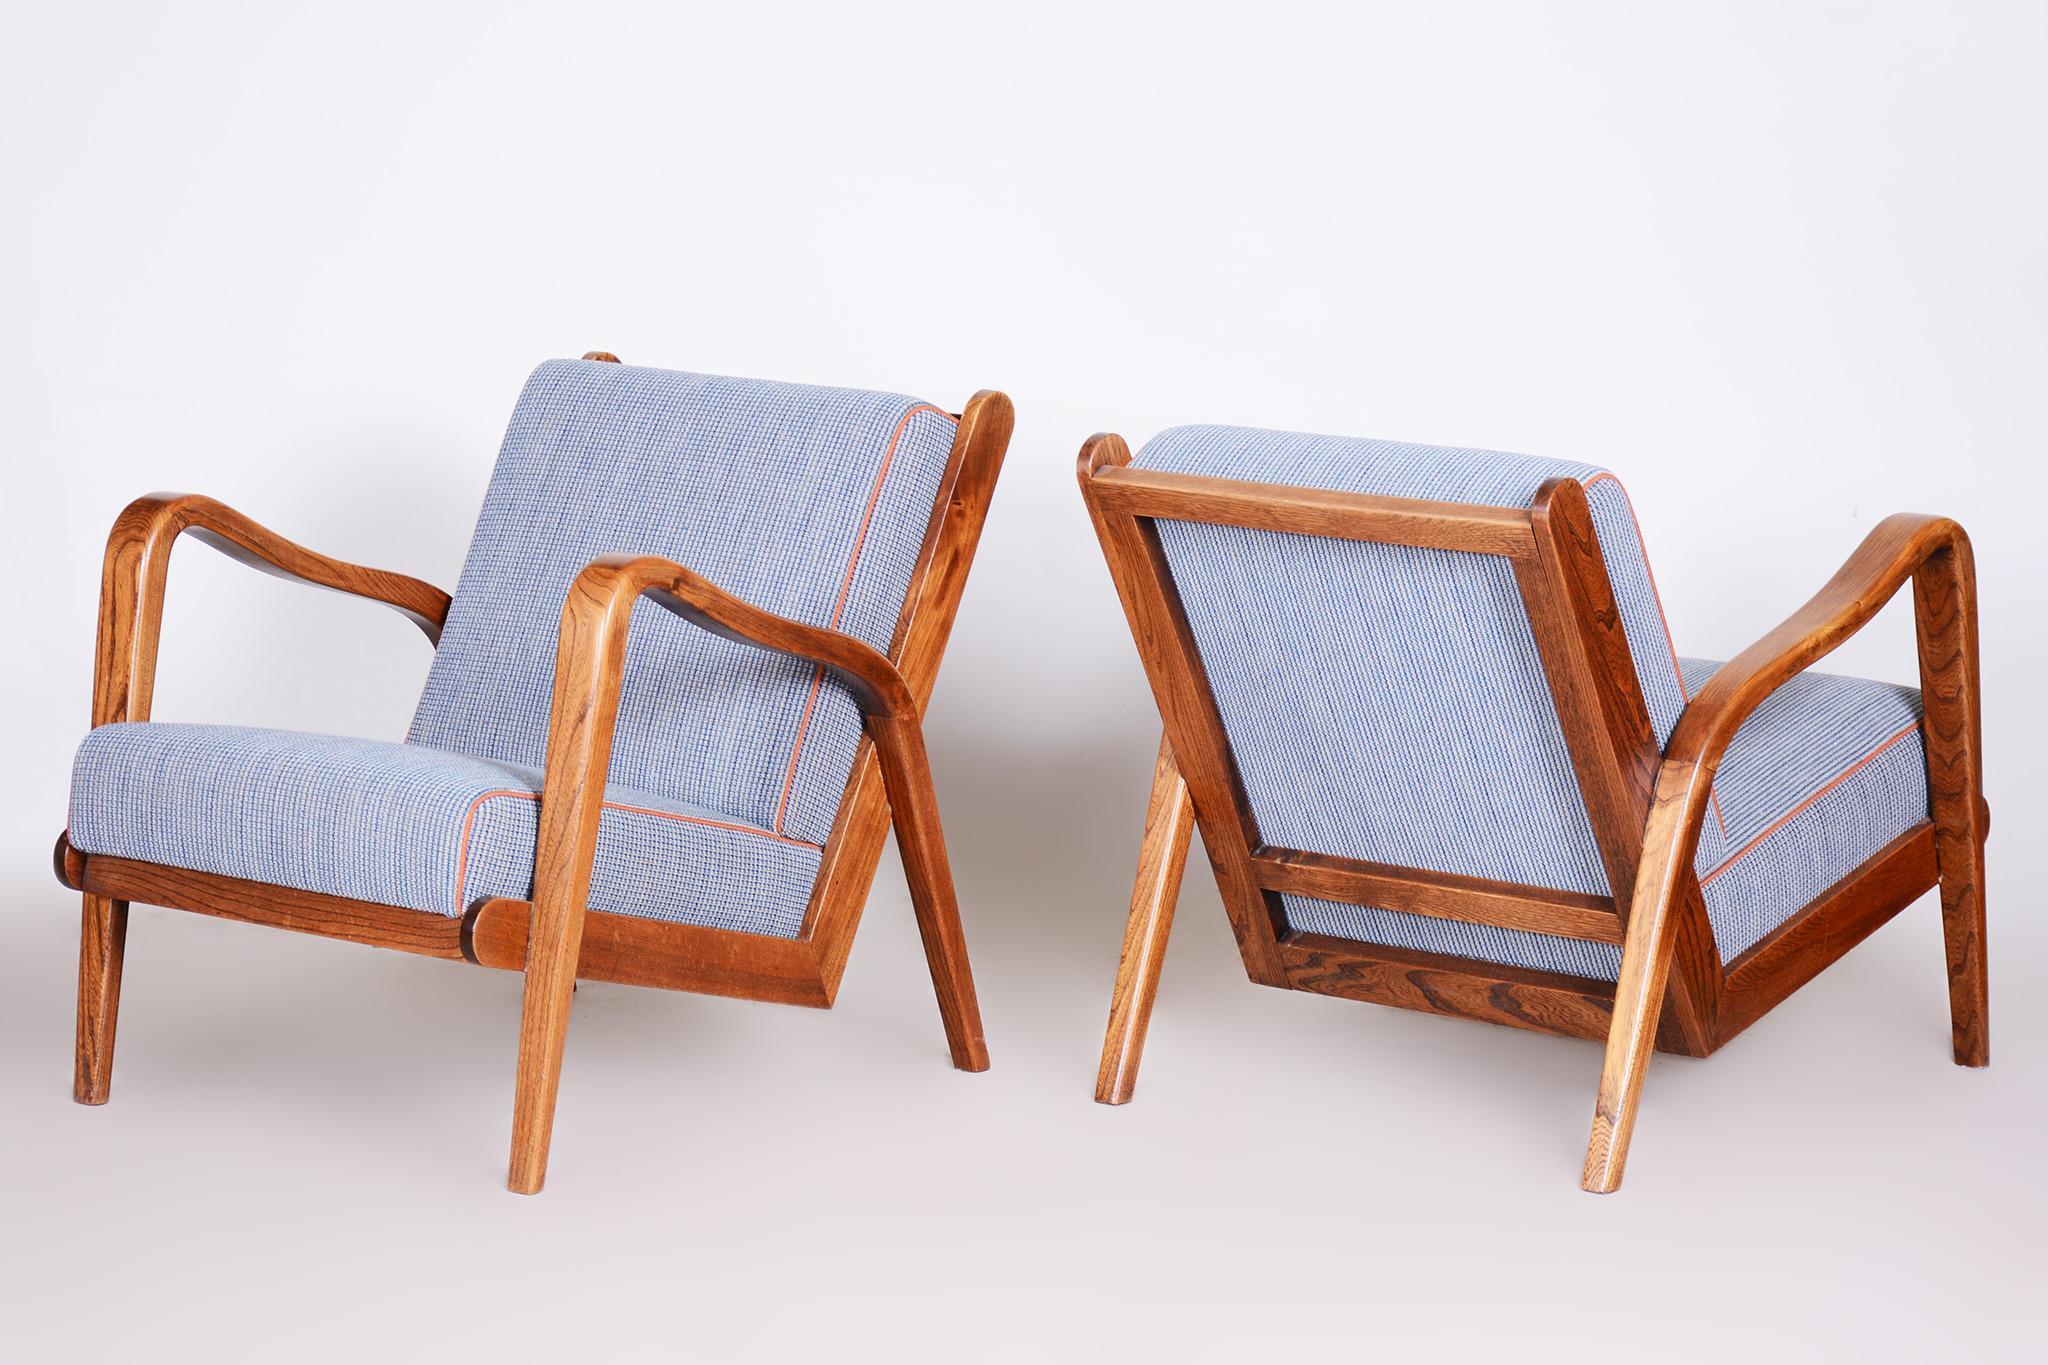 Ash Mid Century Armchairs Made in Czechia '40s, by Jan Vanek, Fully Restored 1